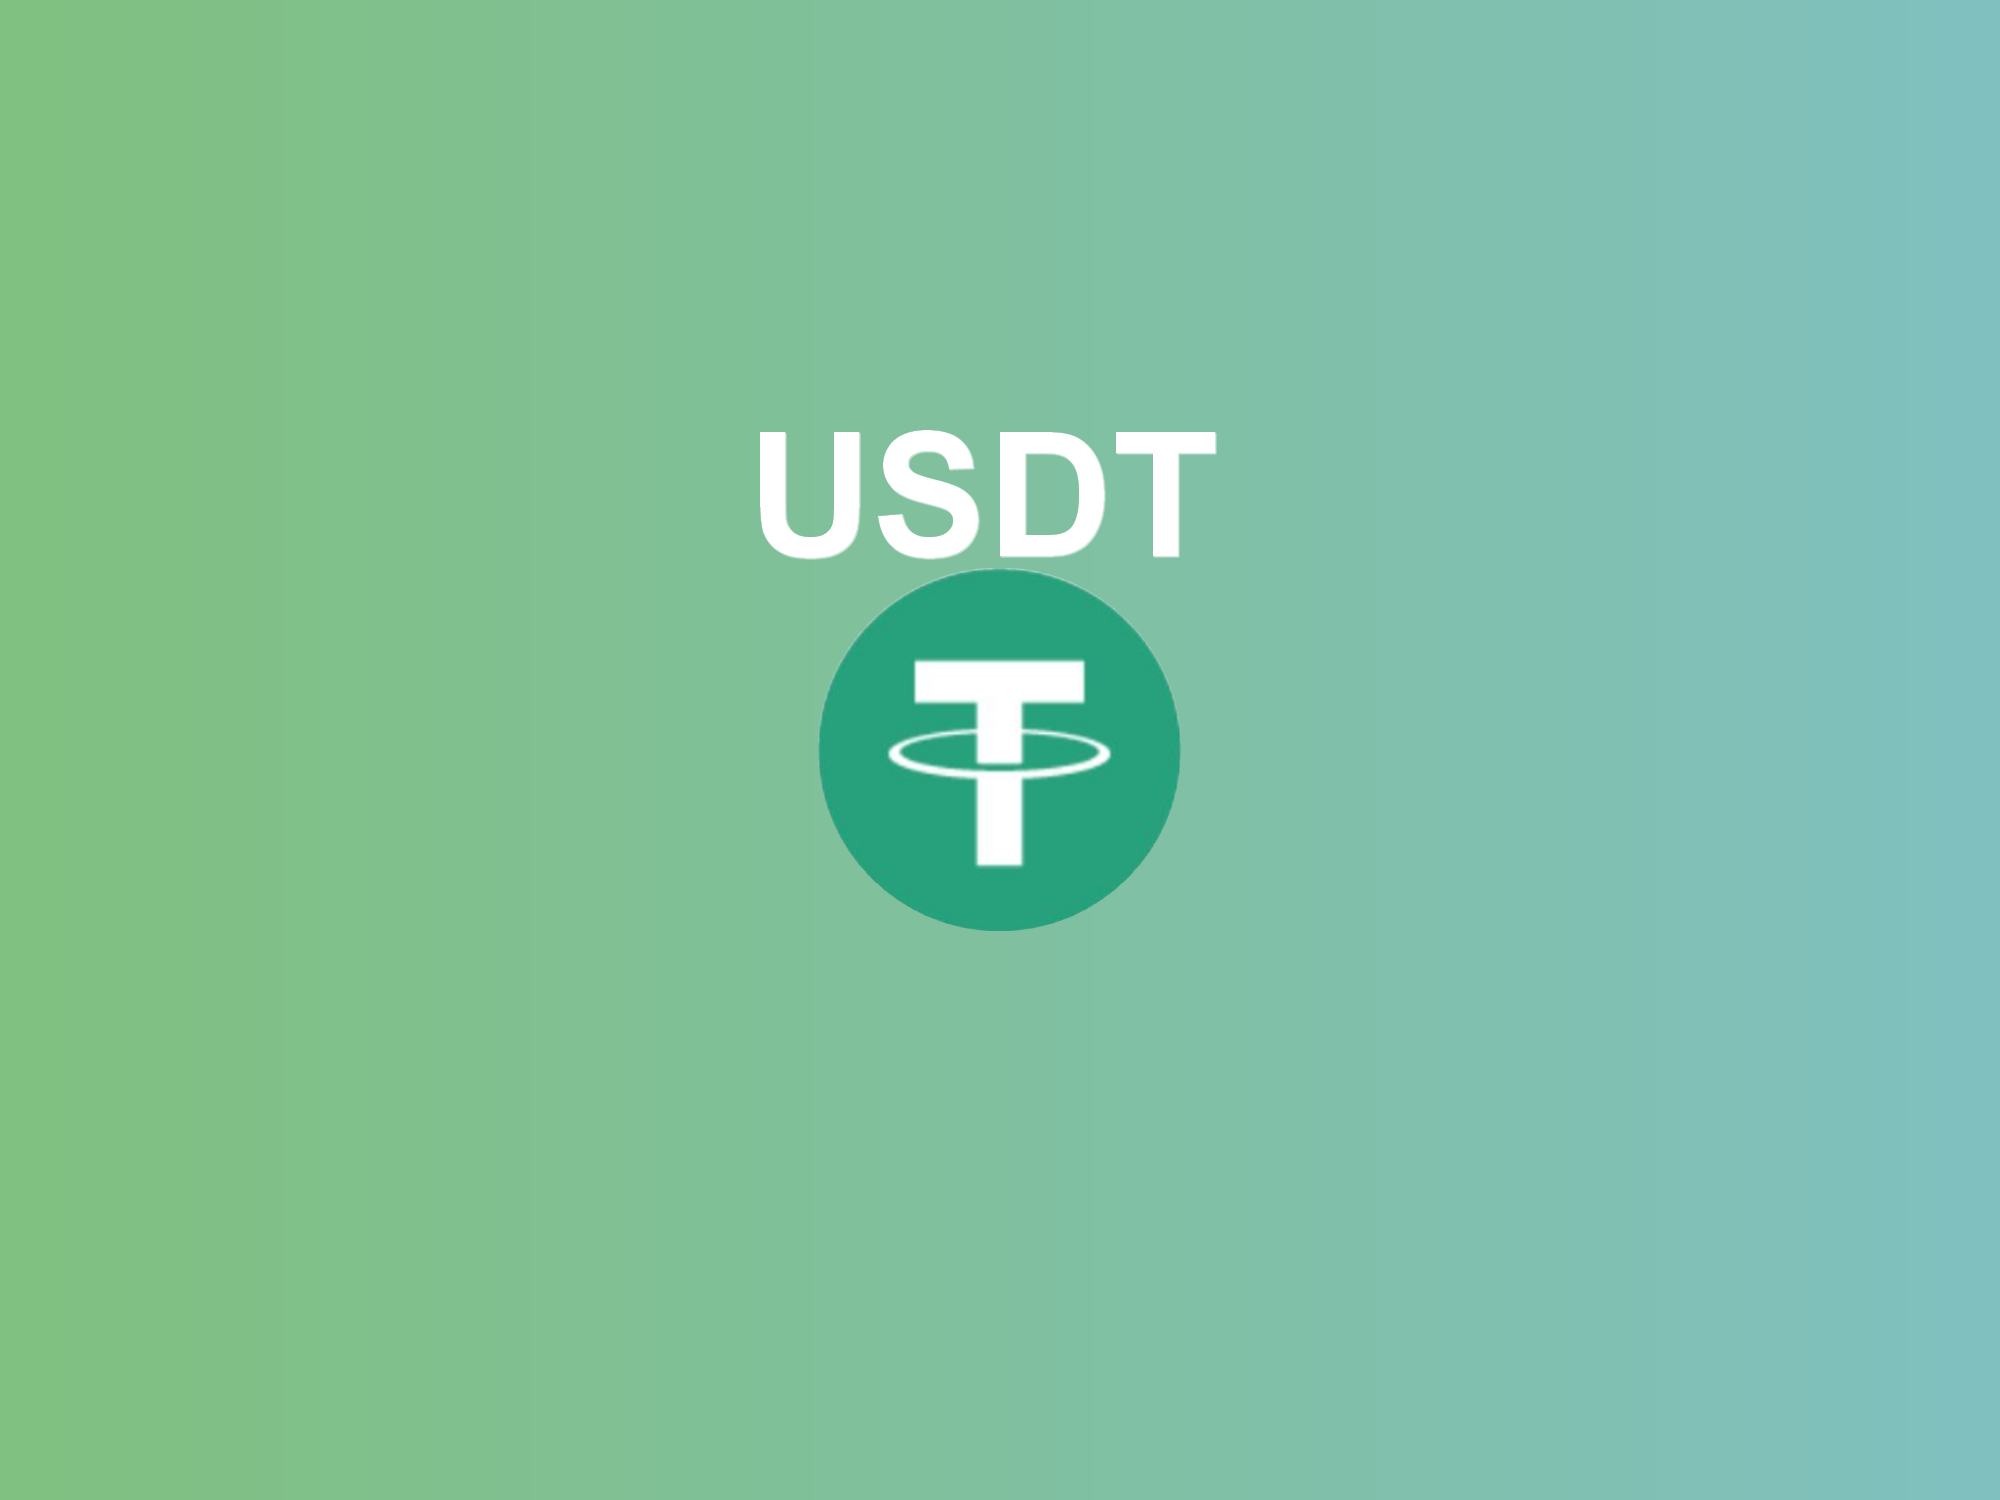 How to add your USDT wallet to MataMask?